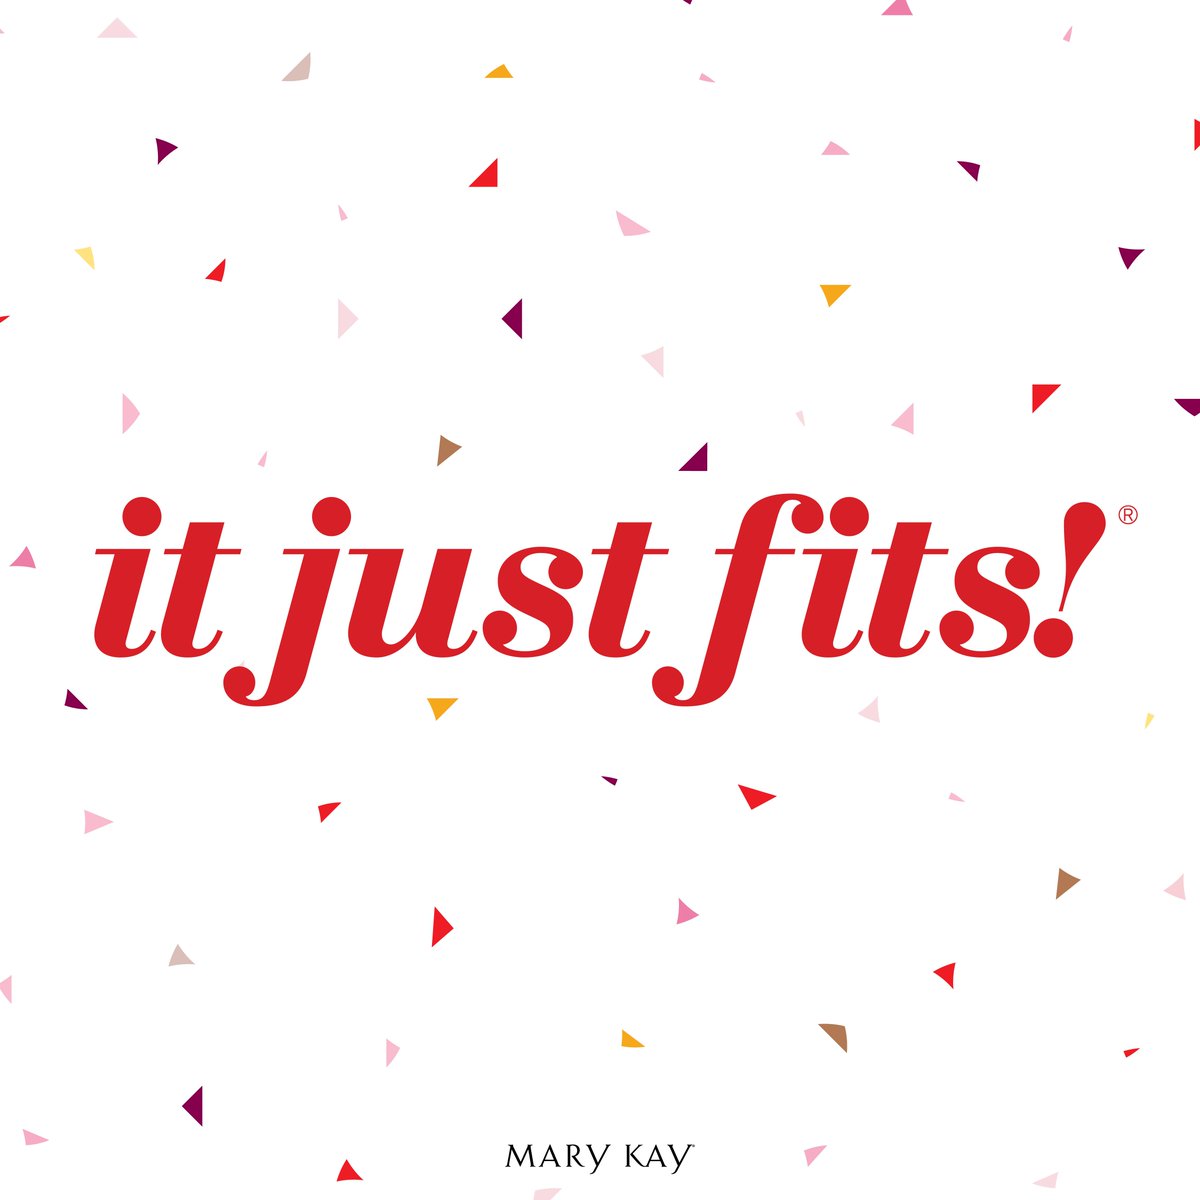 For 60 years Mary Kay has offered women an opportunity that meets them exactly where they are. 💗 What would you do with extra income? #MyMKLife